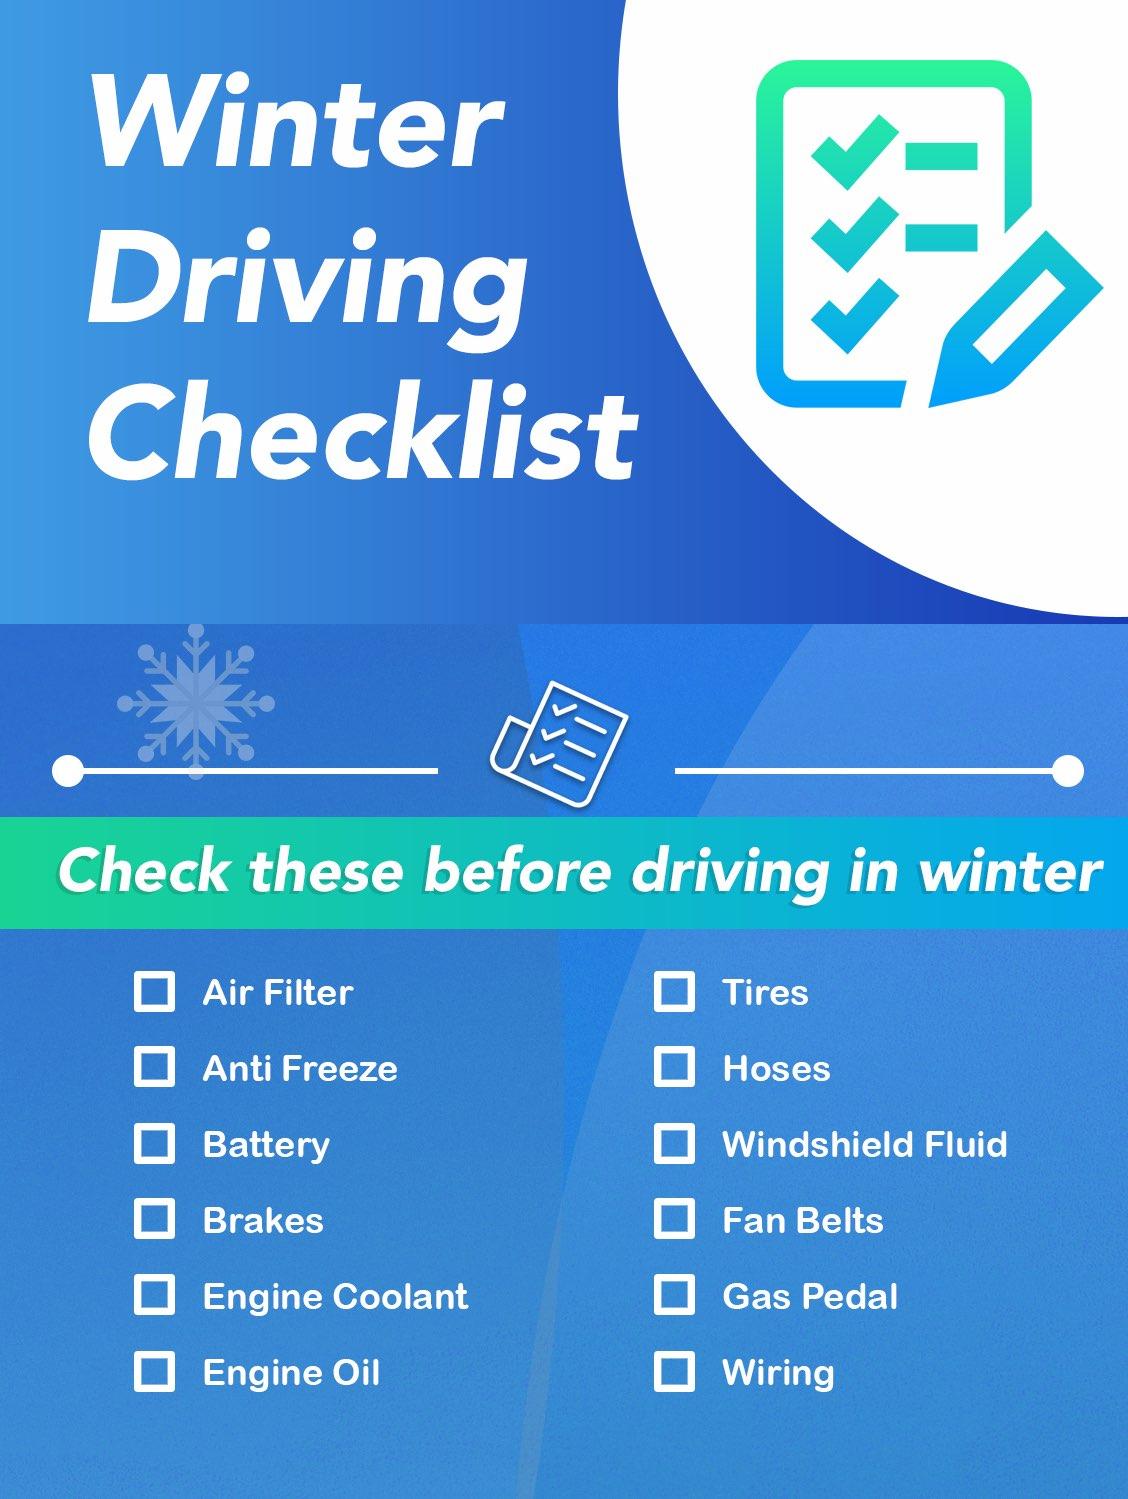 Check these before driving in winter